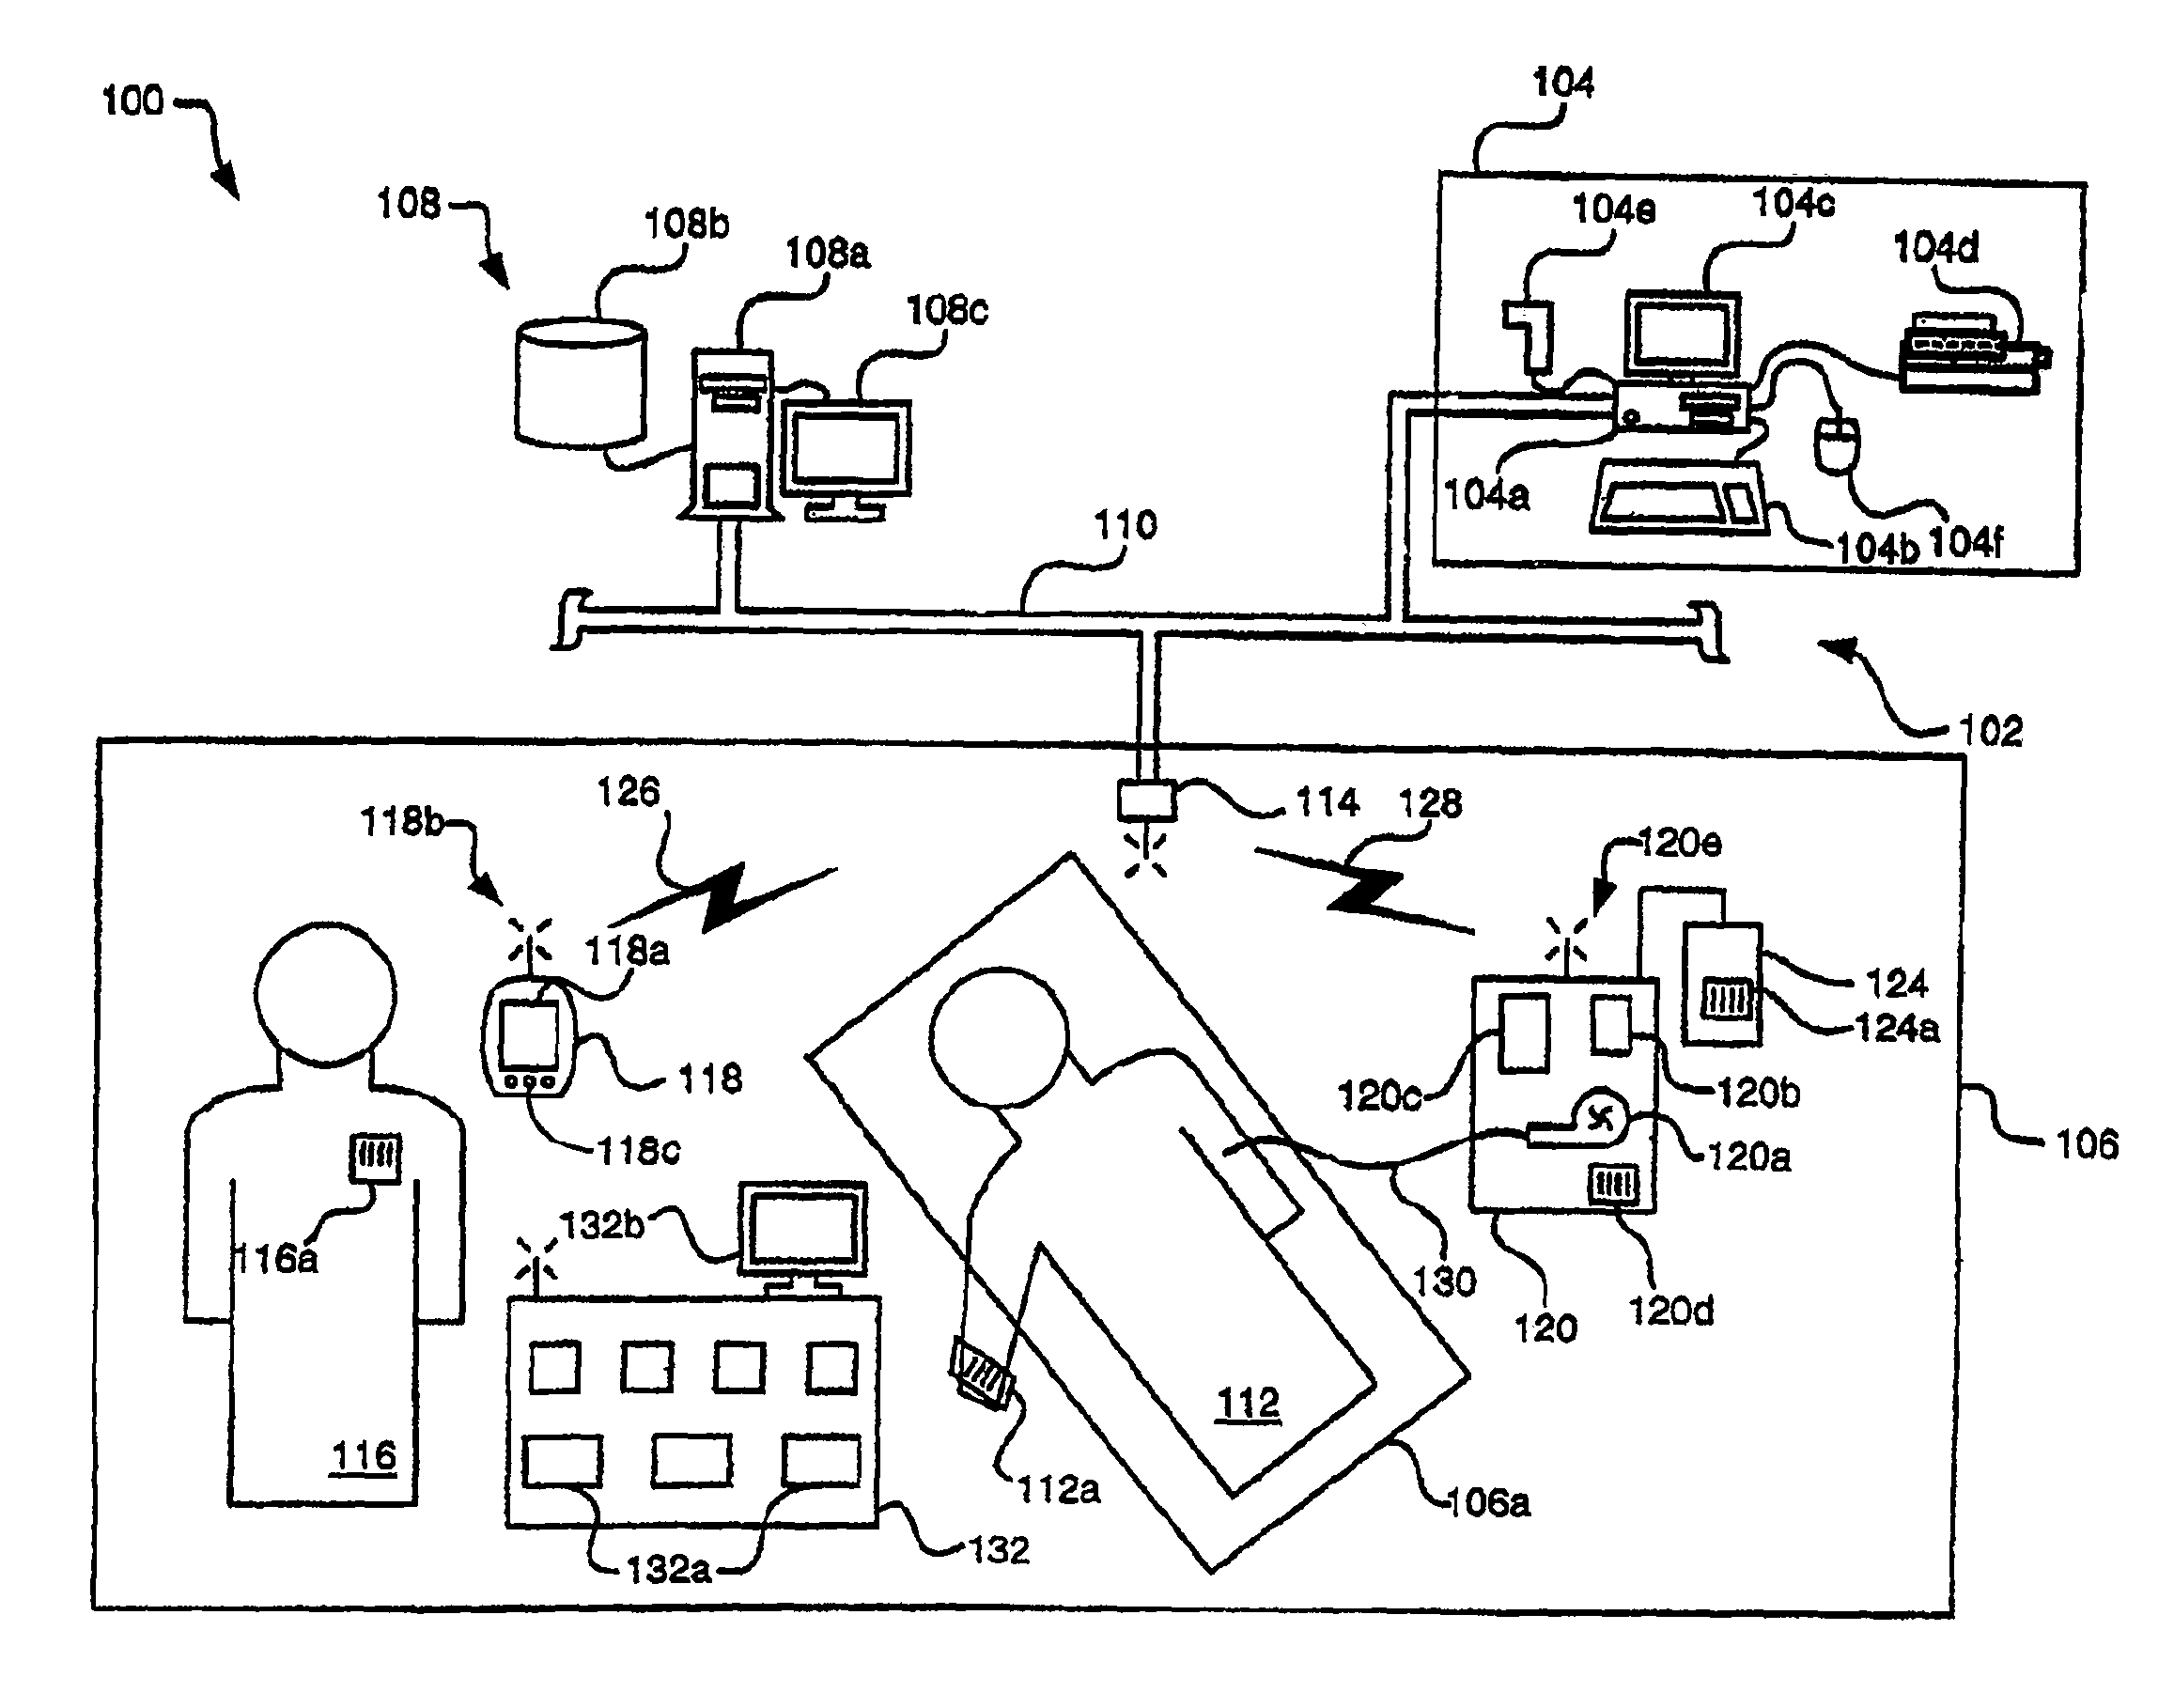 System and method for notification and escalation of medical data